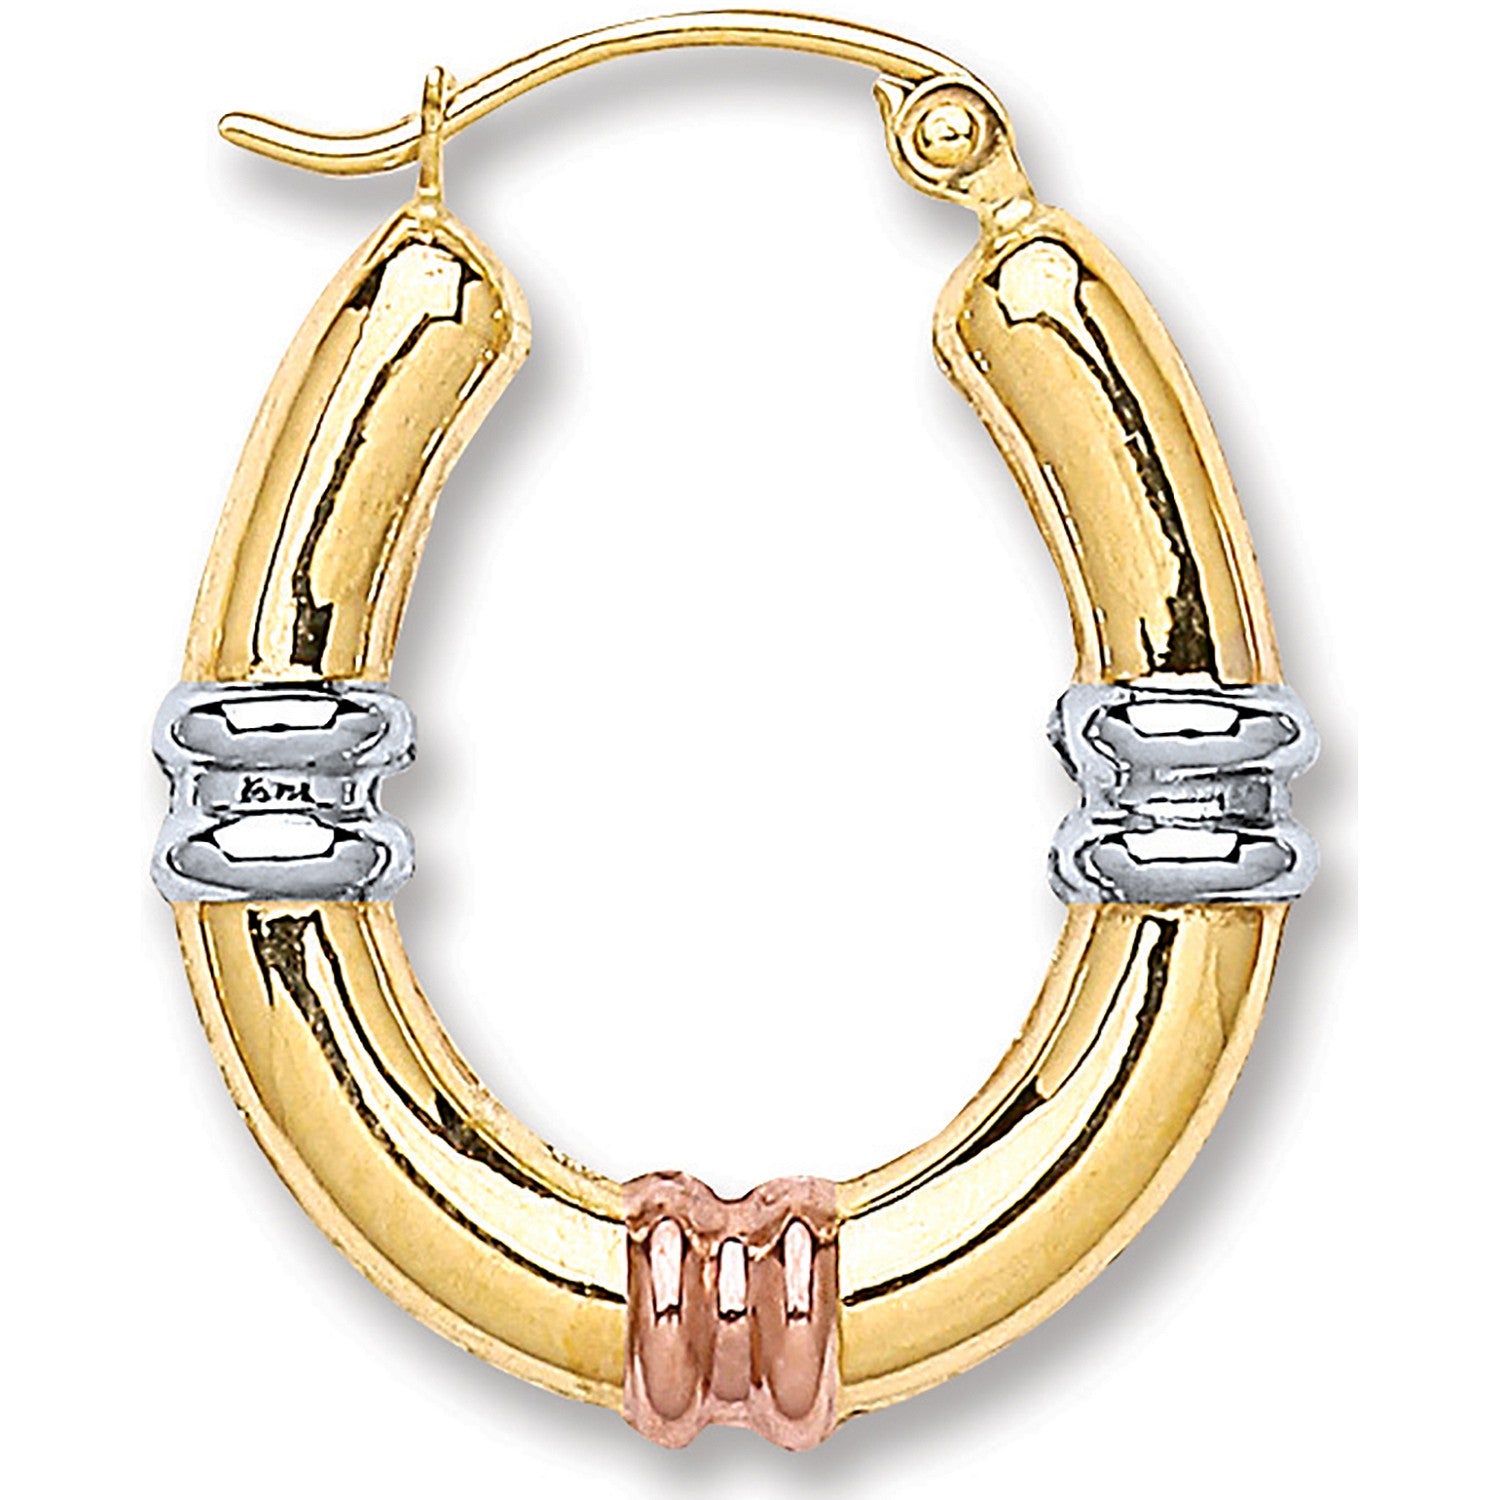 R, White Gold & Yellow Gold Oval Ribbed Hoop Earrings